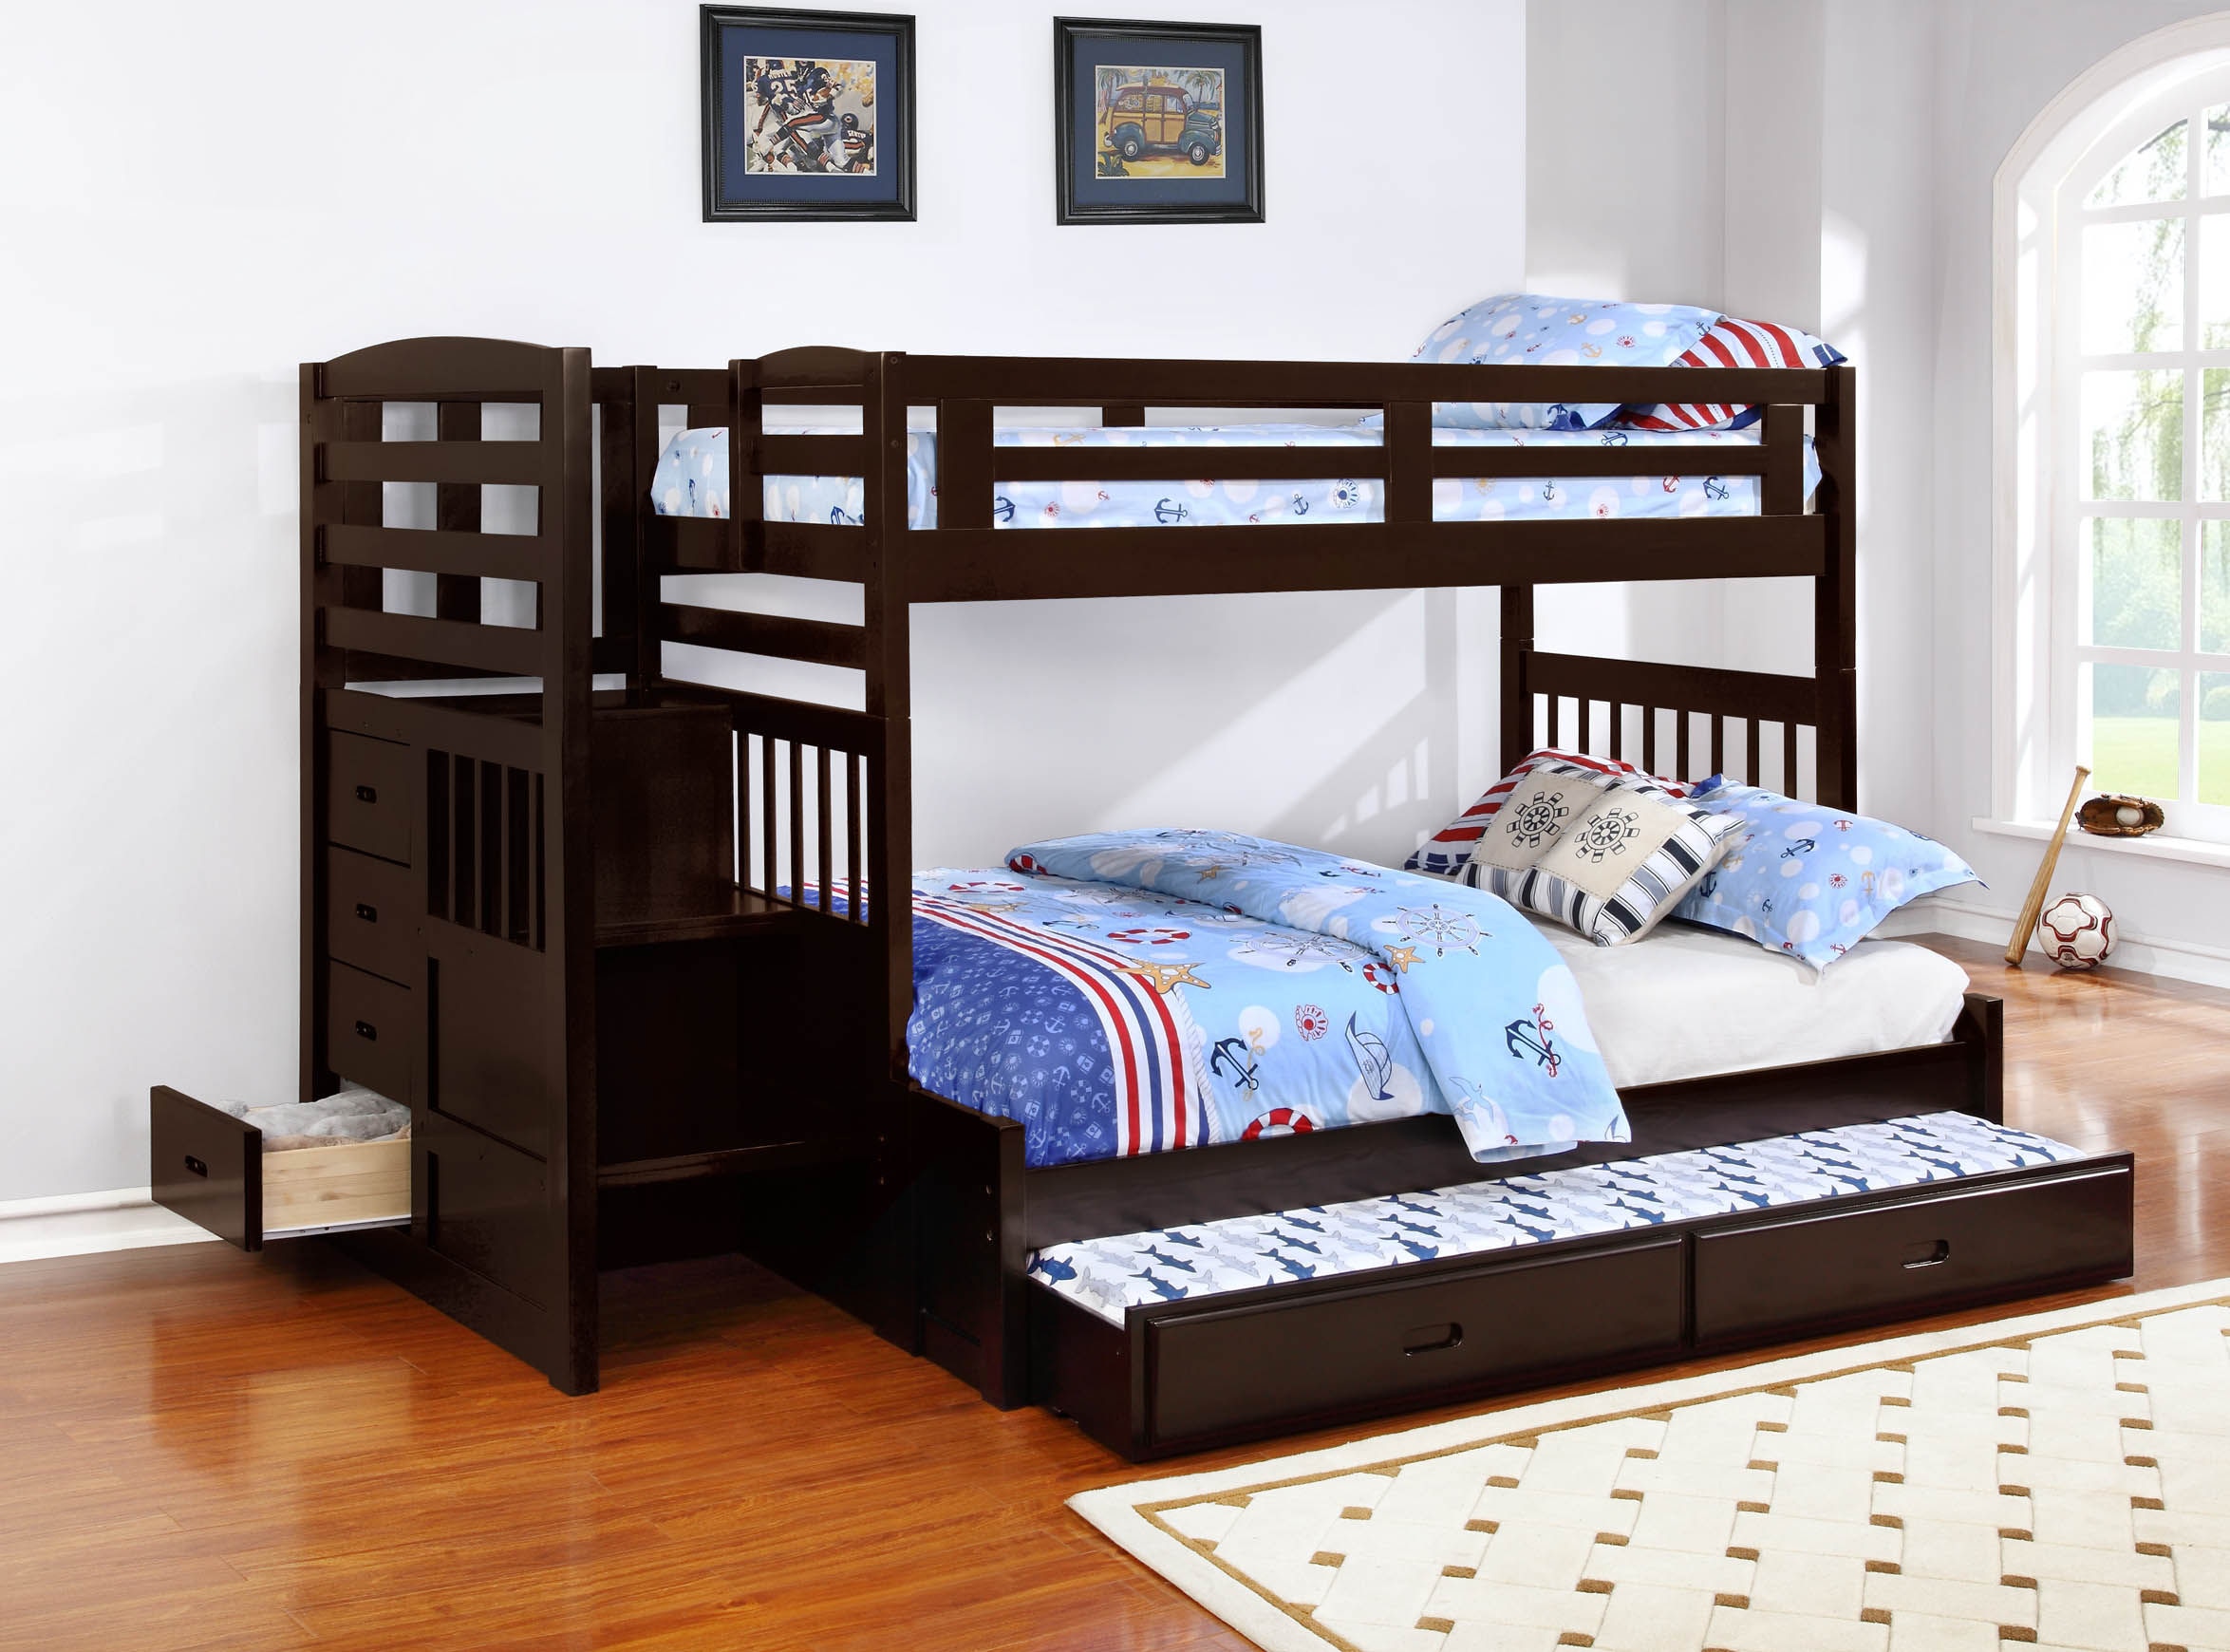 Coaster Bedroom Twin/Full Bunk Bed Component 460366B2 